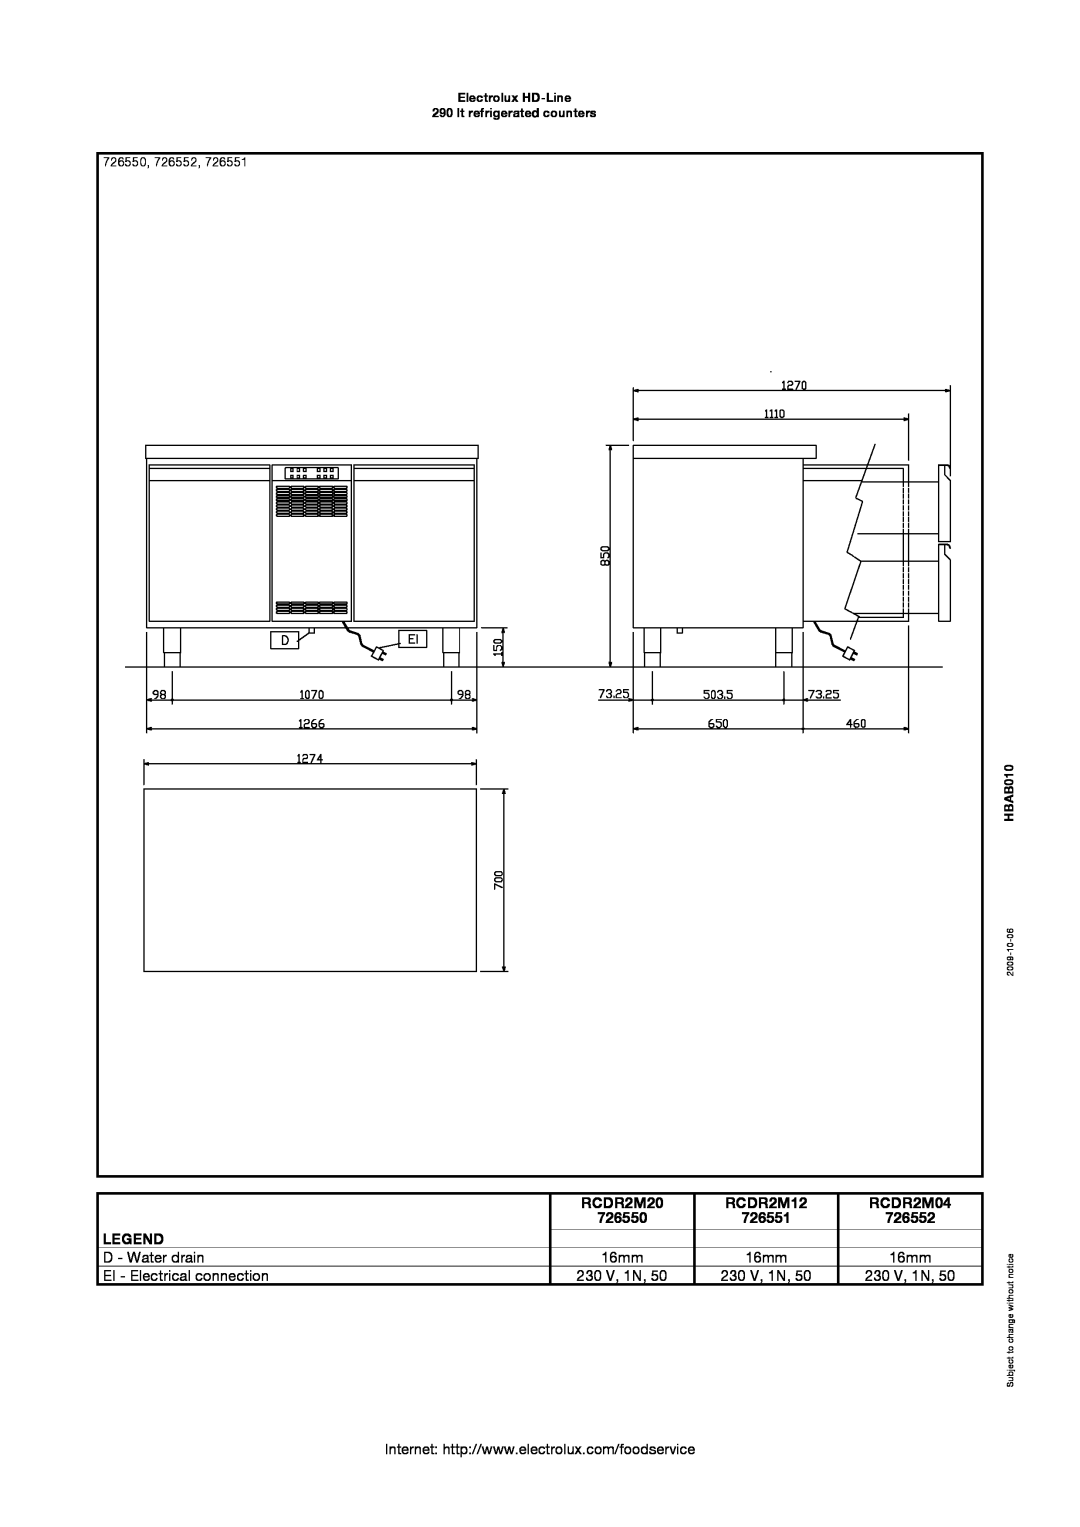 Electrolux 726551, 727074, 727075 726550, 726552, Electrolux HD-Line 290 lt refrigerated counters, HBAB010, 2009-10-06 